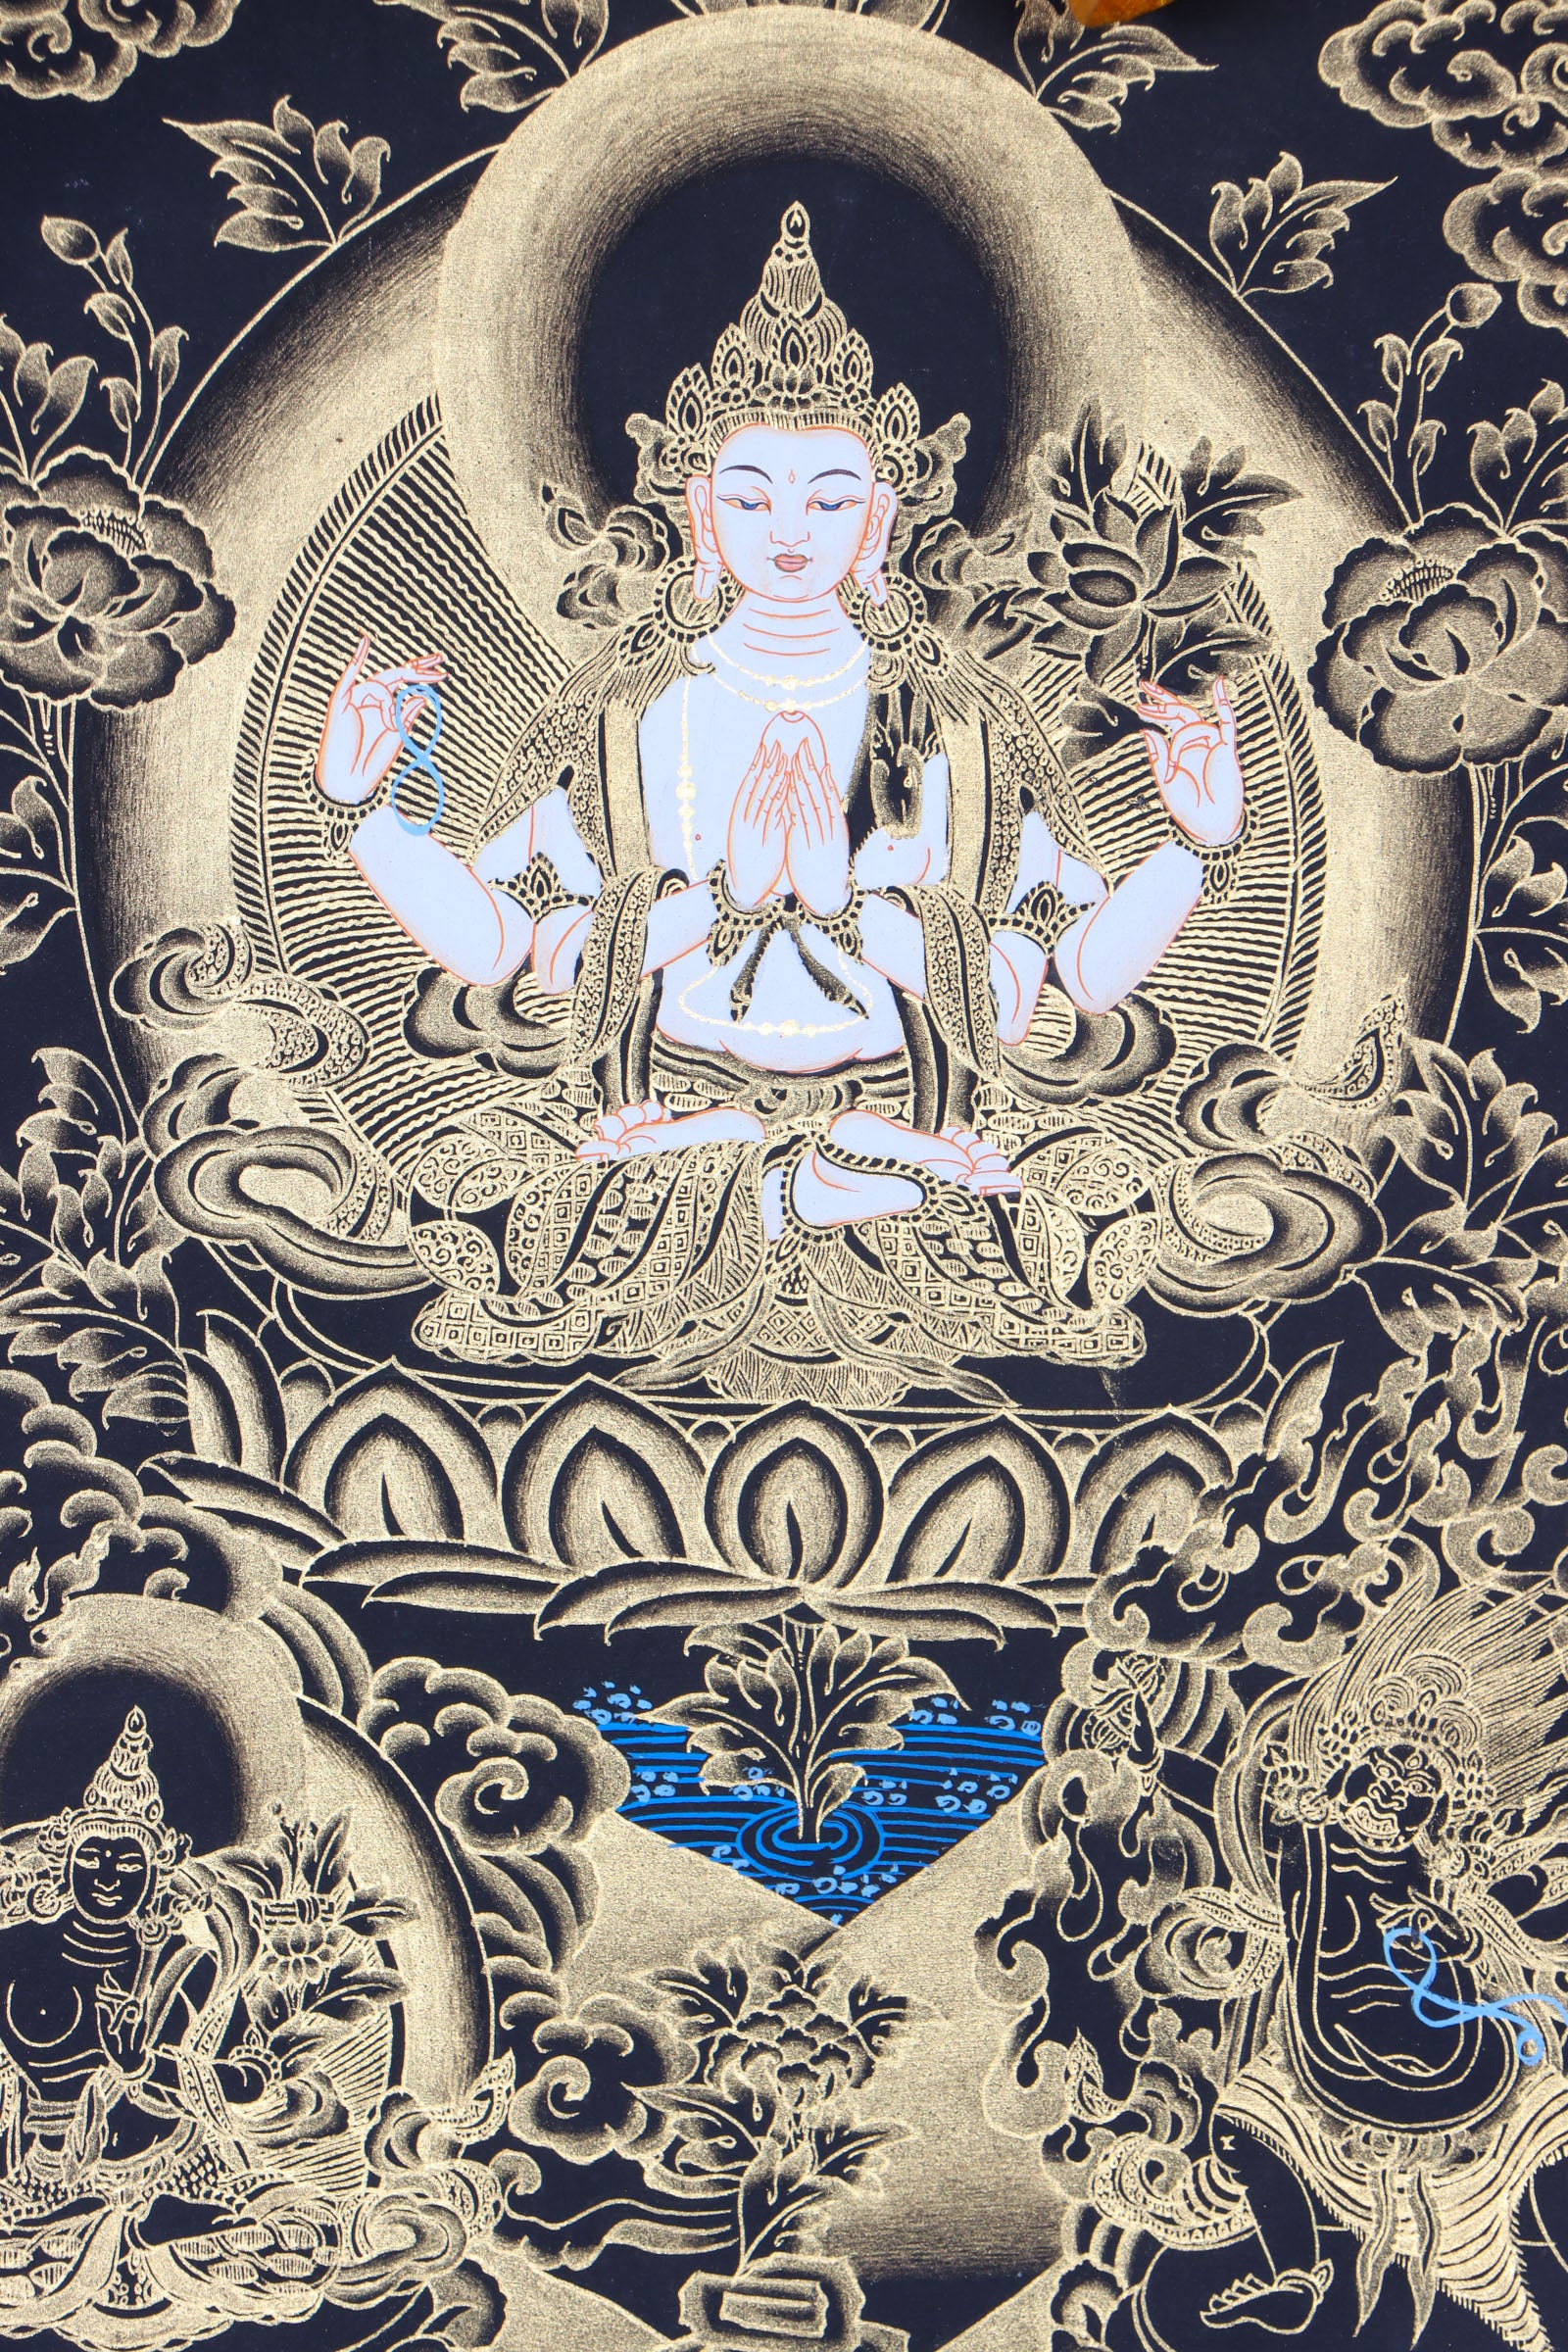 Chengresi Brocade Thangka Painting for wisdom and compassion.